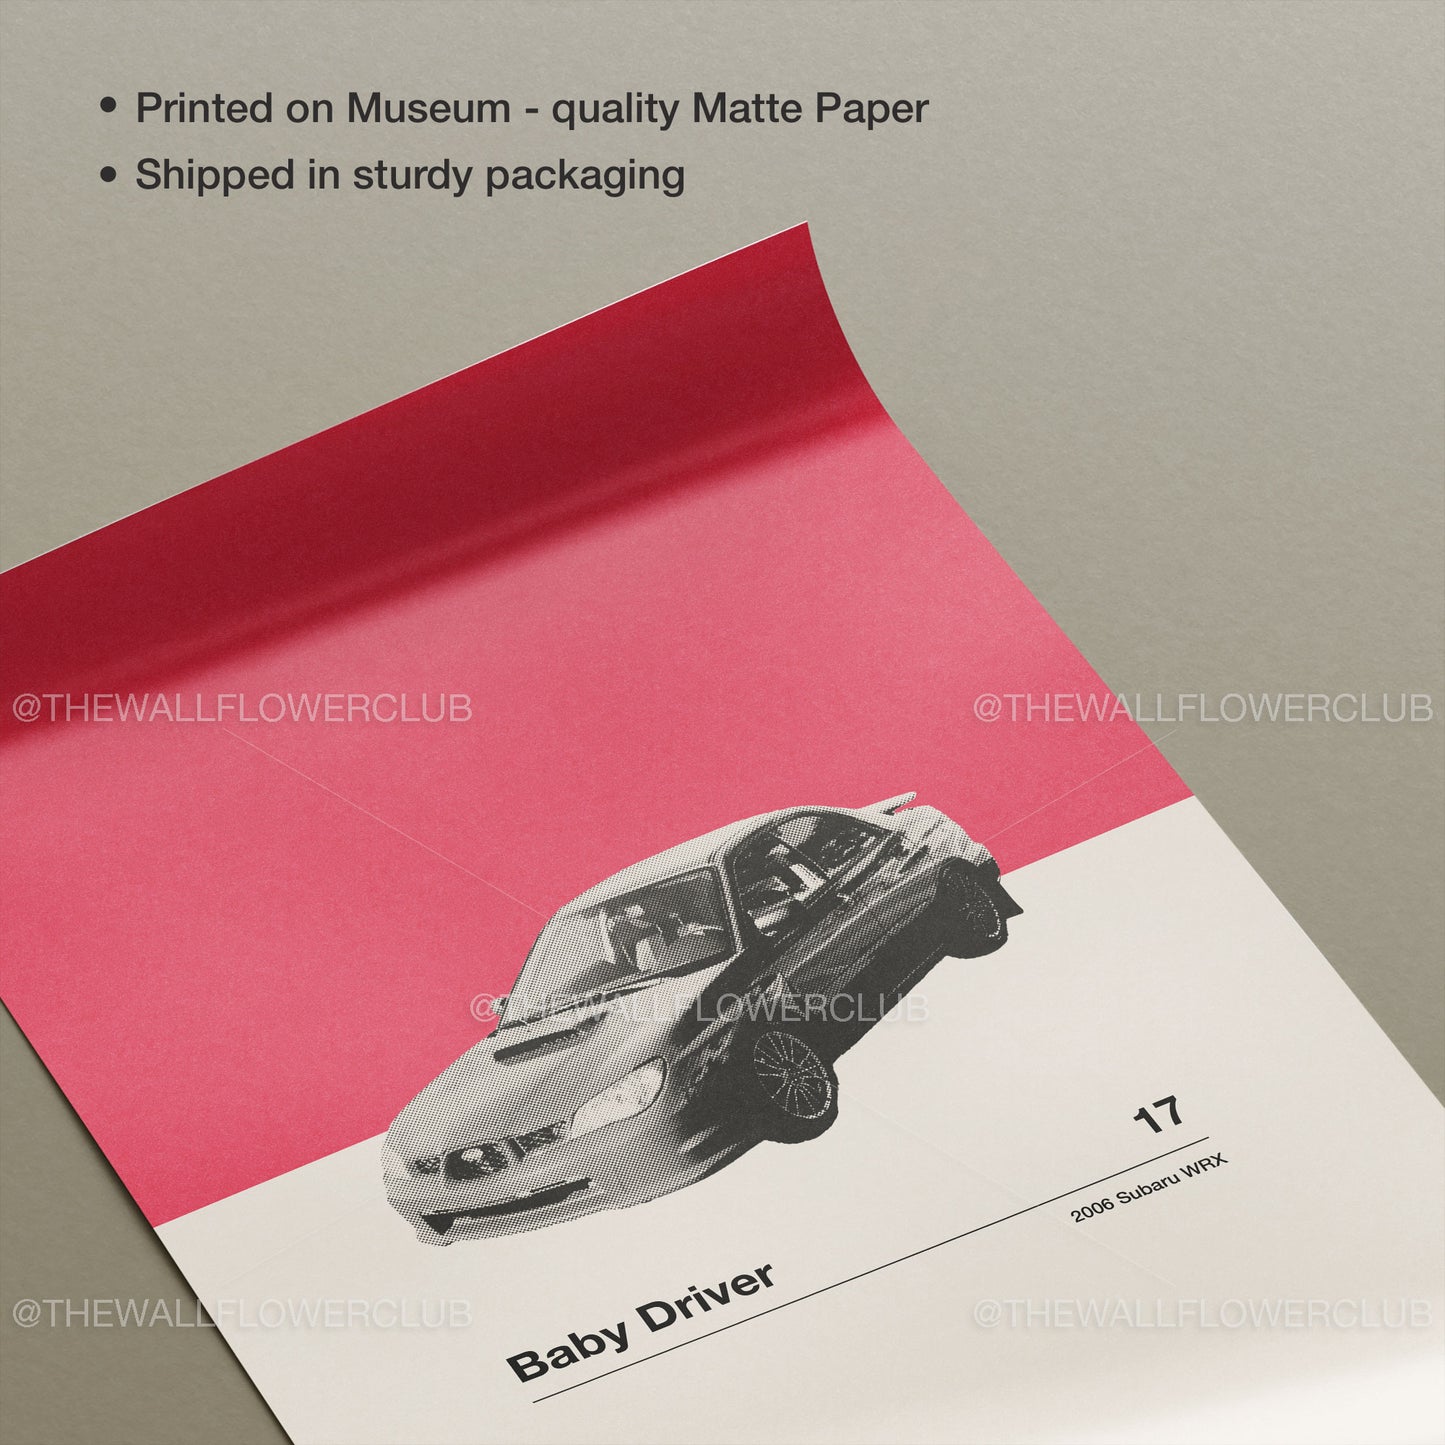 Baby Driver Car Poster | Minimalist Movie Poster